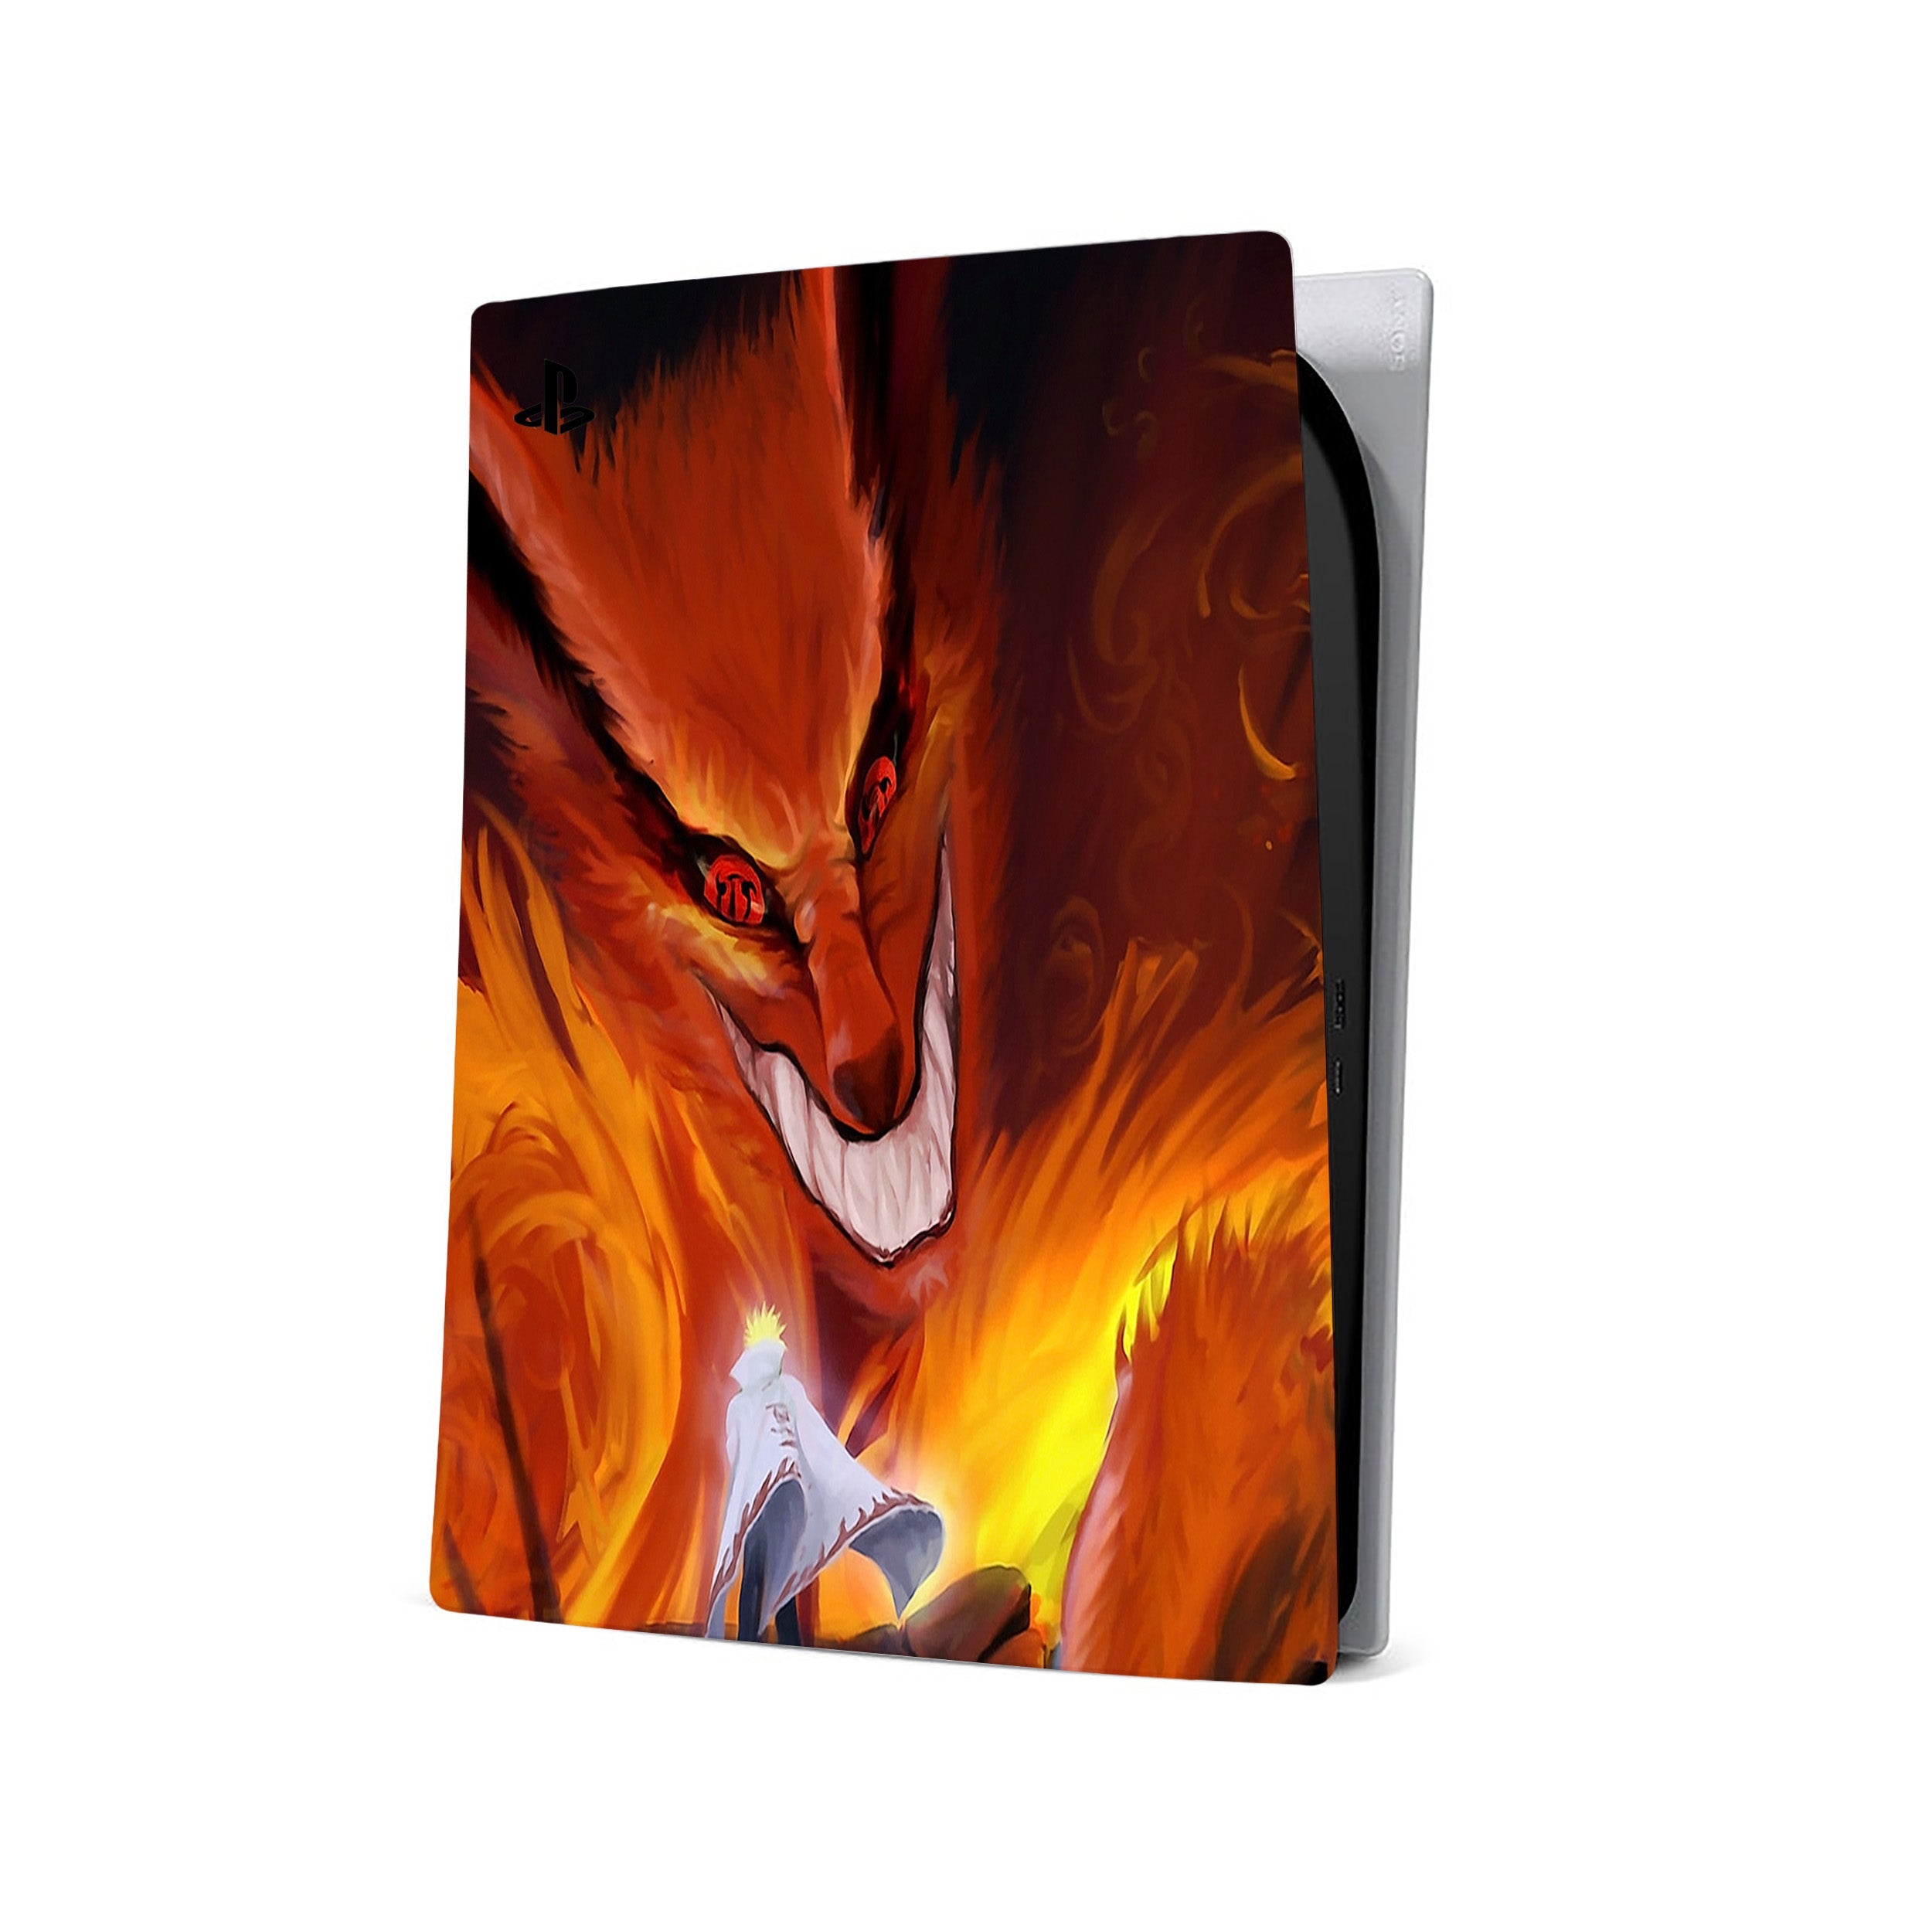 A video game skin featuring a Naruto Fire Wolf design for the PS5.